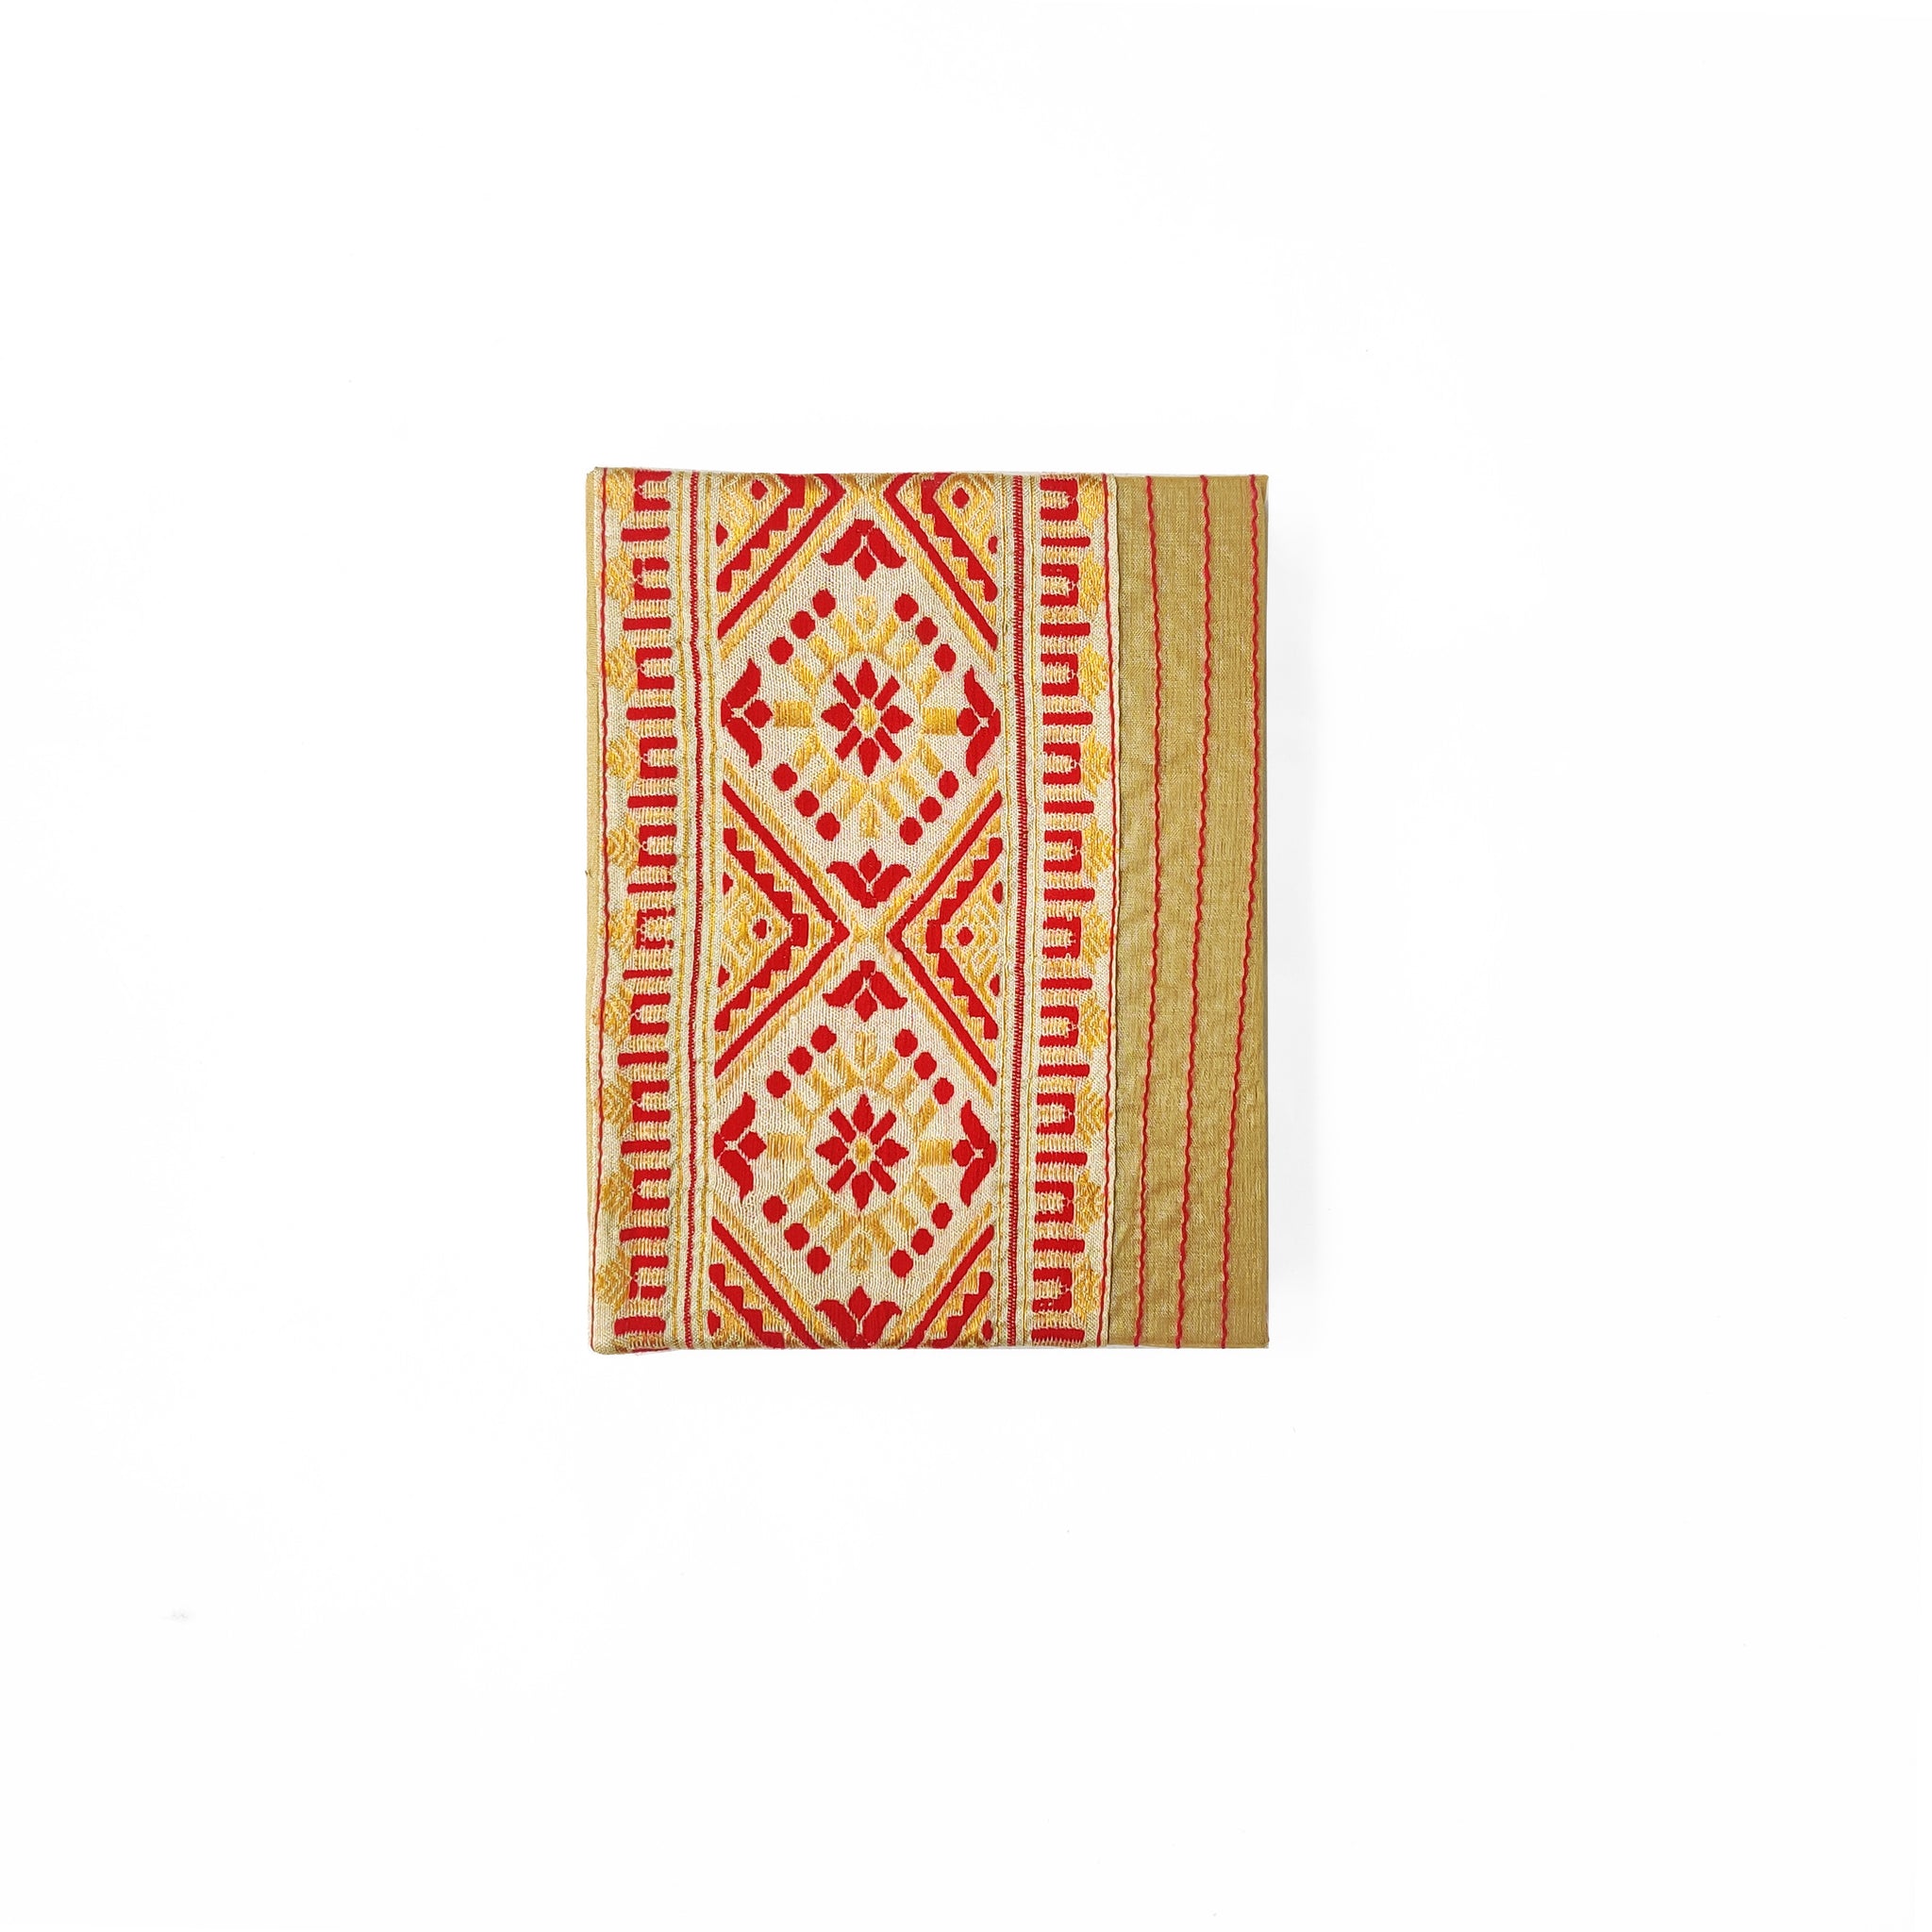 Bihu Collection Plain Notebook 9 - Small - NEST by Arpit Agarwal